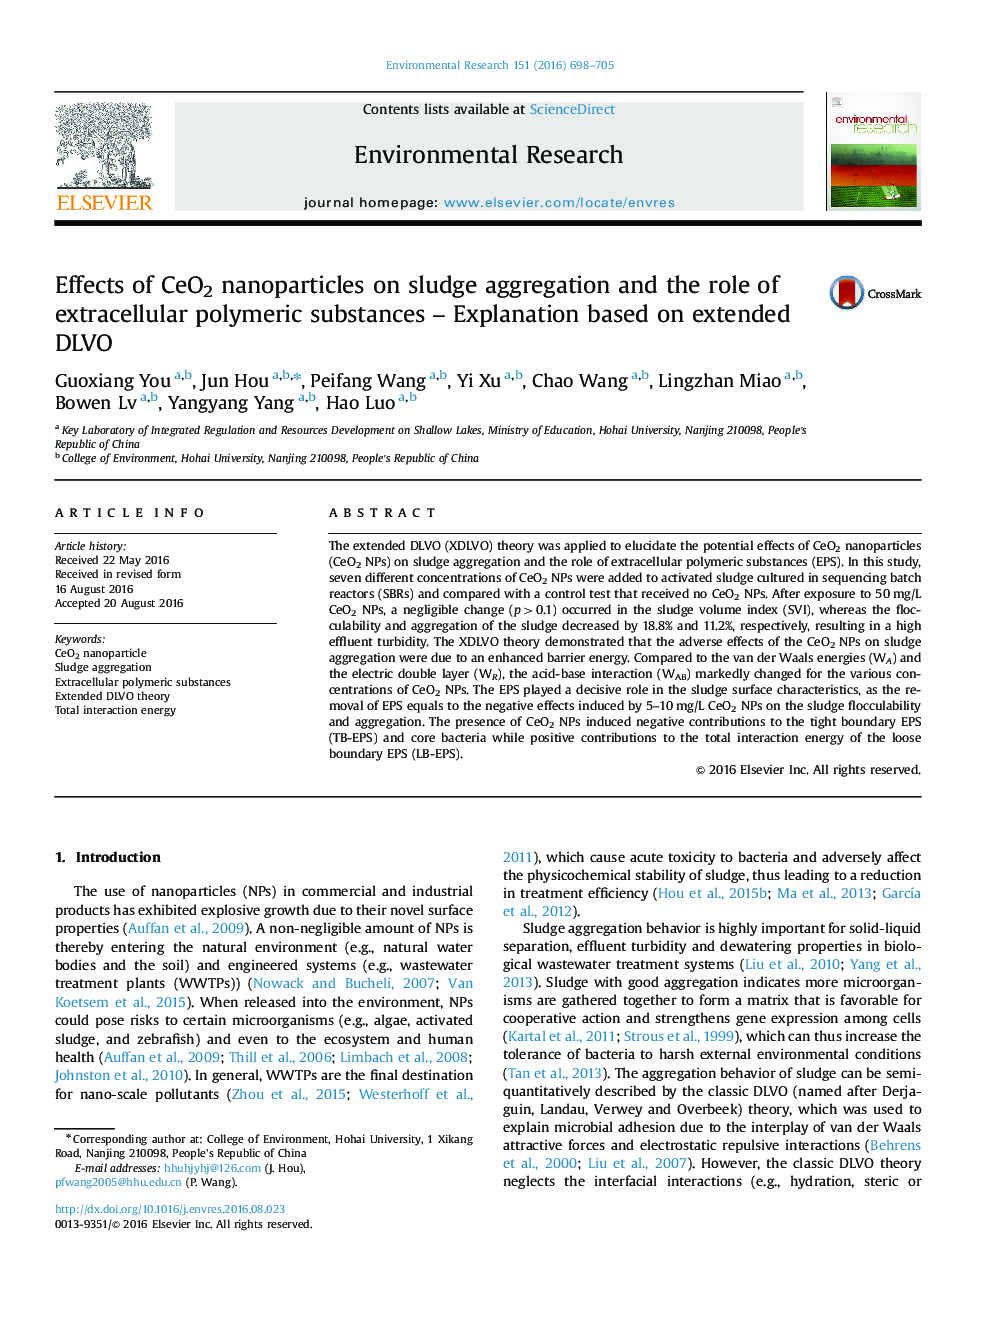 Effects of CeO2 nanoparticles on sludge aggregation and the role of extracellular polymeric substances - Explanation based on extended DLVO